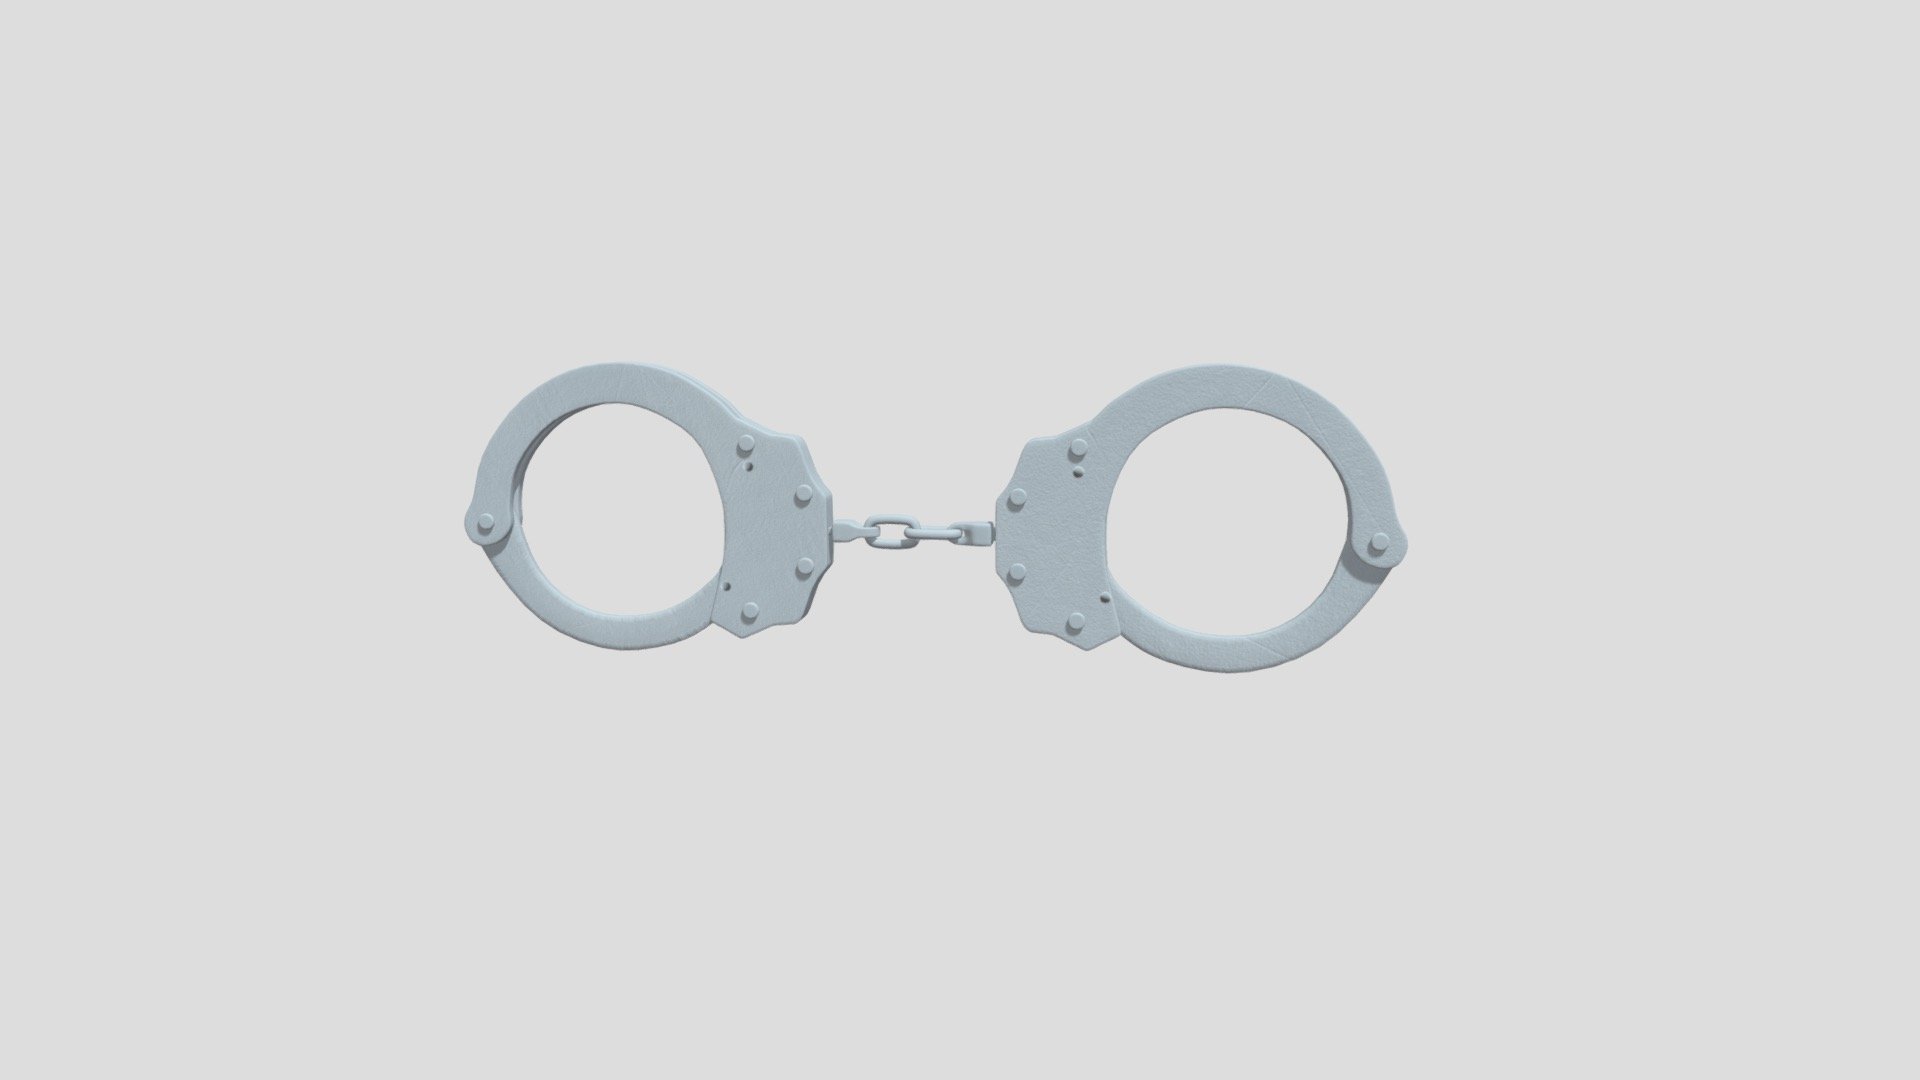 Textures: 2048 x 2048, Two colors on texture: Grey and light Blue.

Has Normal Map: 2048 x 2048. 

Materials: 1 - Handcuffs

Smooth shaded.

Mirrored.

Rigged.

Subdivision Level: 1

Origin located on middle-center.

Polygons: 49072

Vertices: 24986

Formats: Fbx, Stl.

I hope you enjoy the model! - Handcuffs - Buy Royalty Free 3D model by ED+ (@EDplus) 3d model